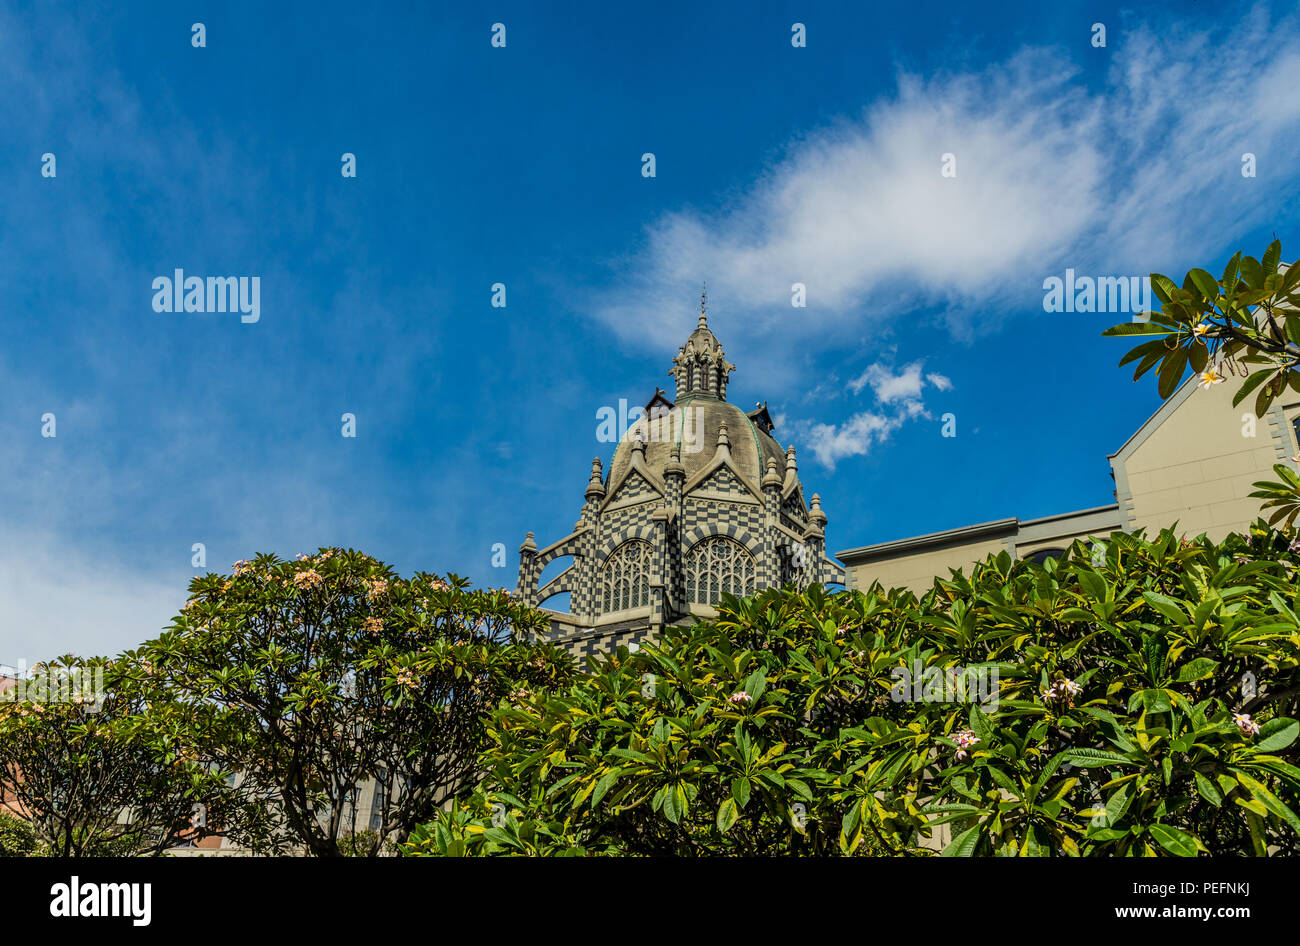 A view of the Rafael Uribe Uribe Palace of Culture Stock Photo